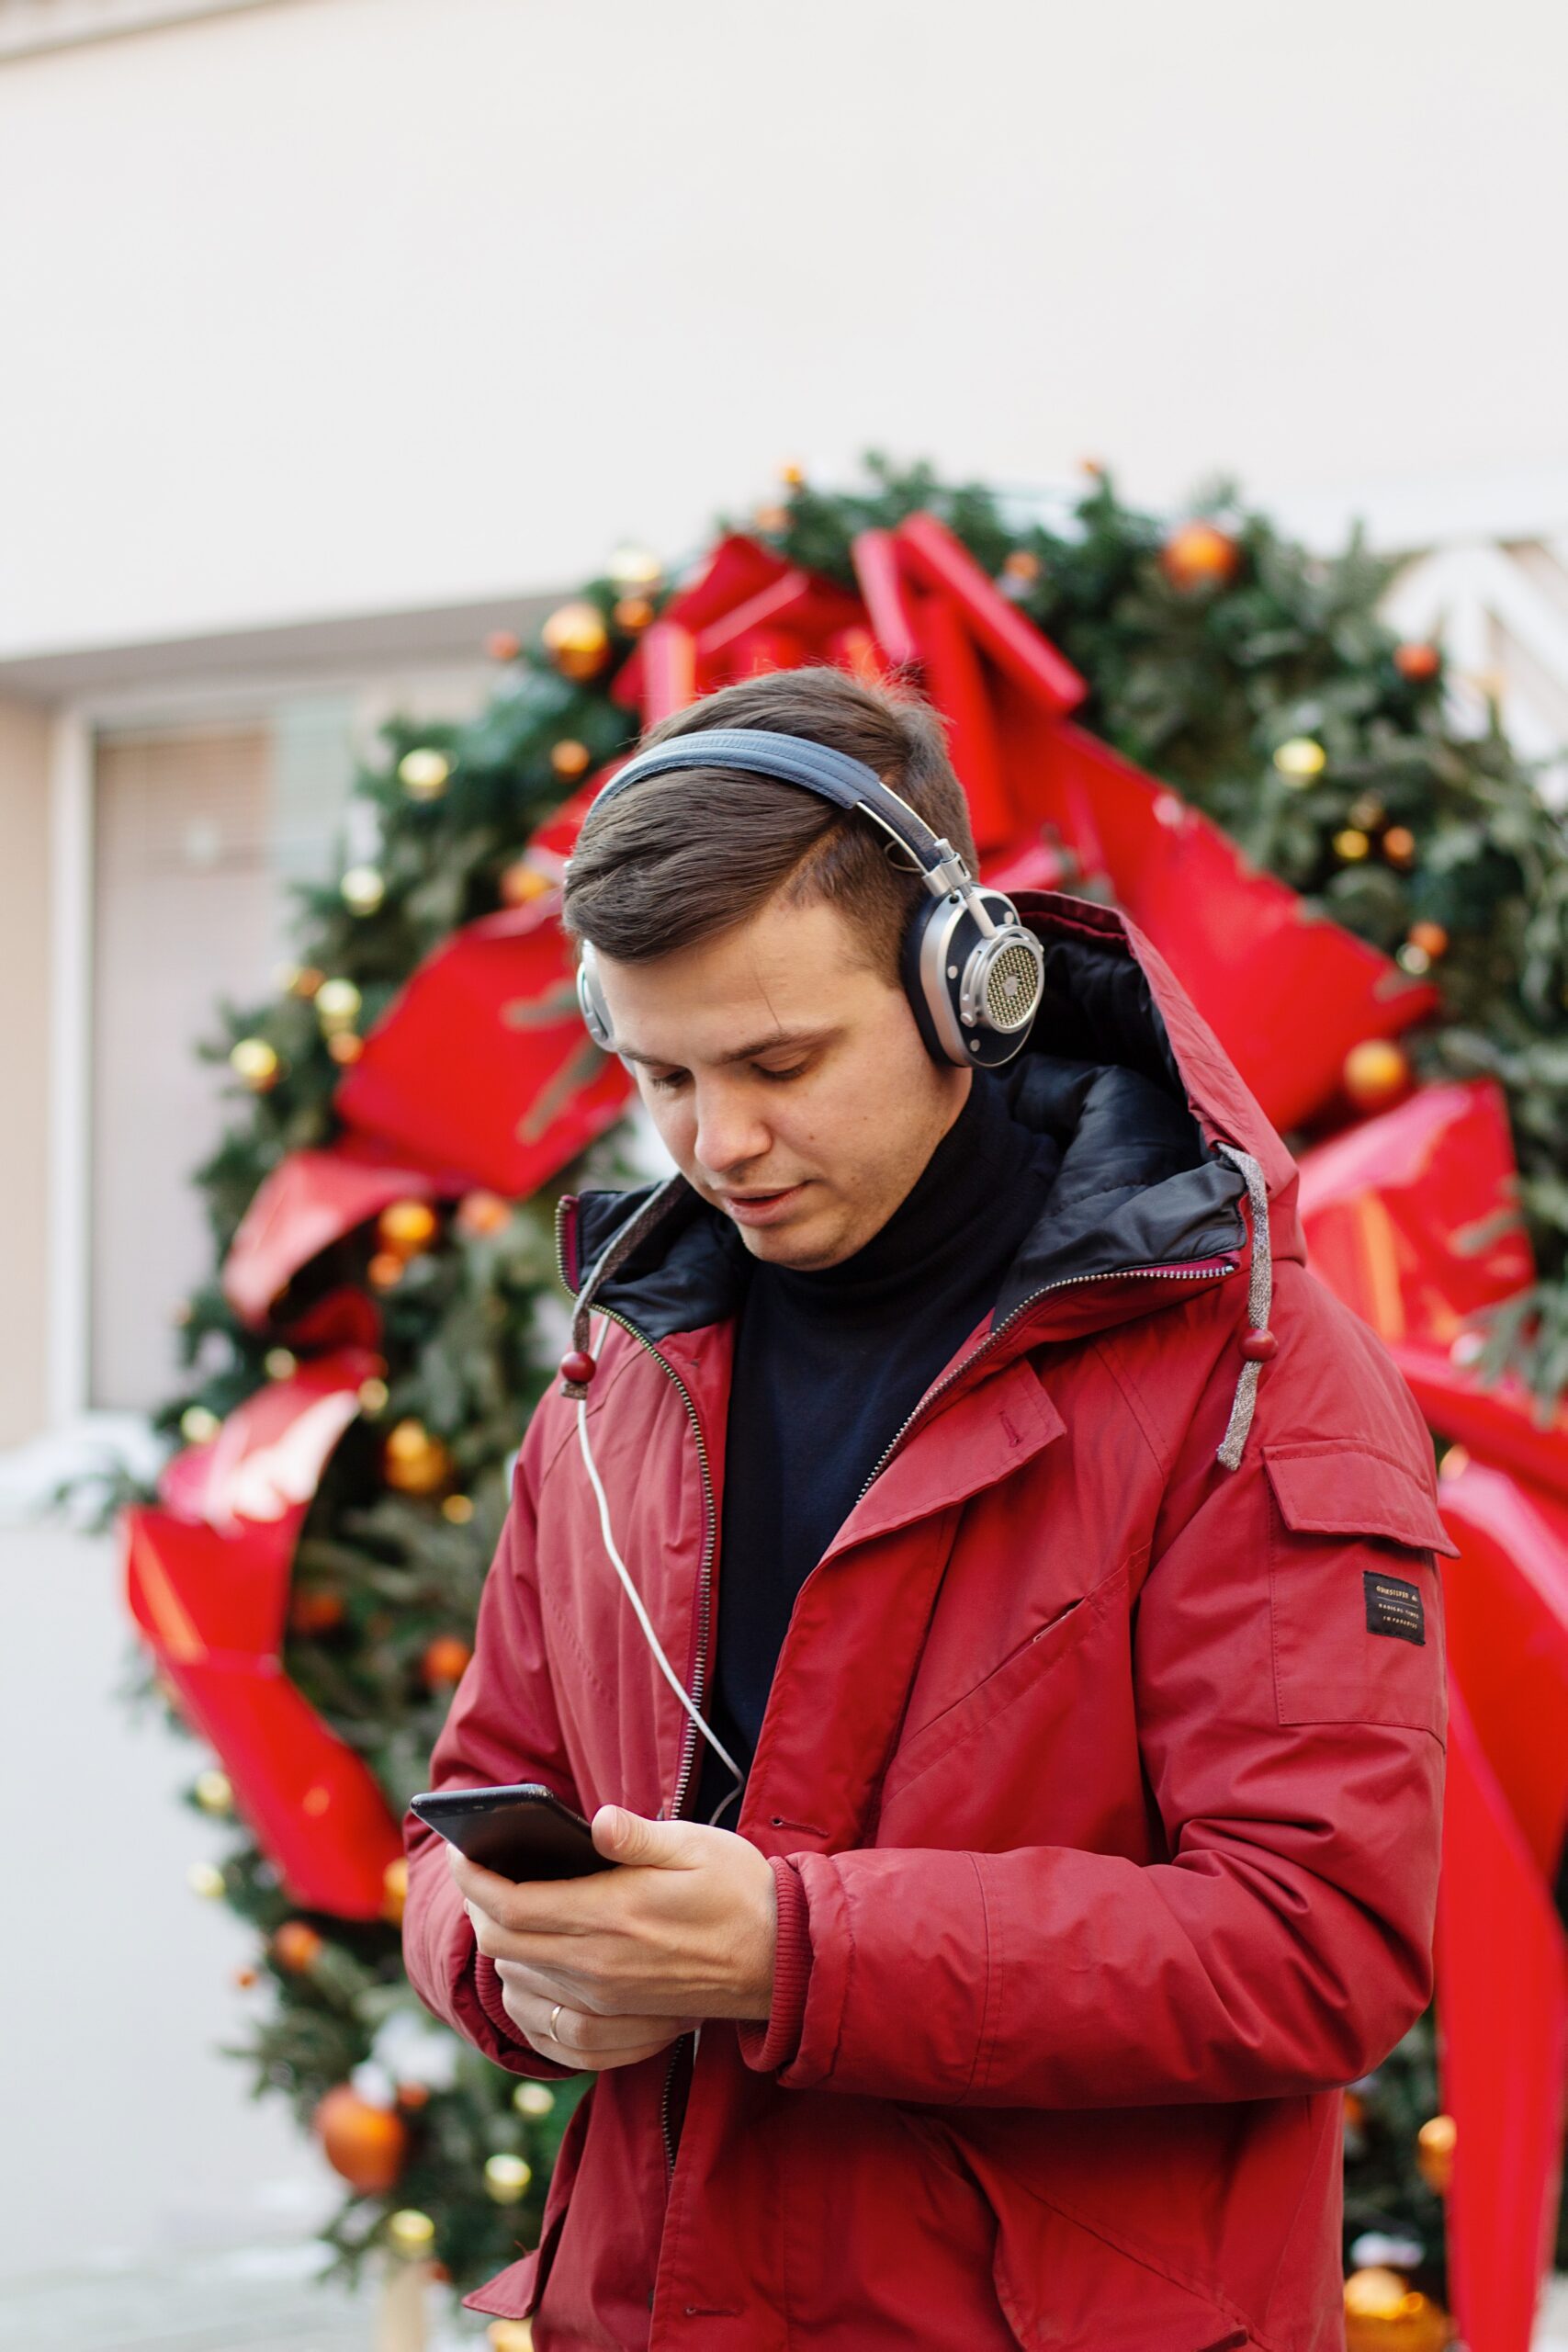 White male-presenting individual with short brown hair wearing red winter jacket and gold ring is holding and looking down at cell phone and appears to be listening to music through attached headphones, large green wreath with red bow in background